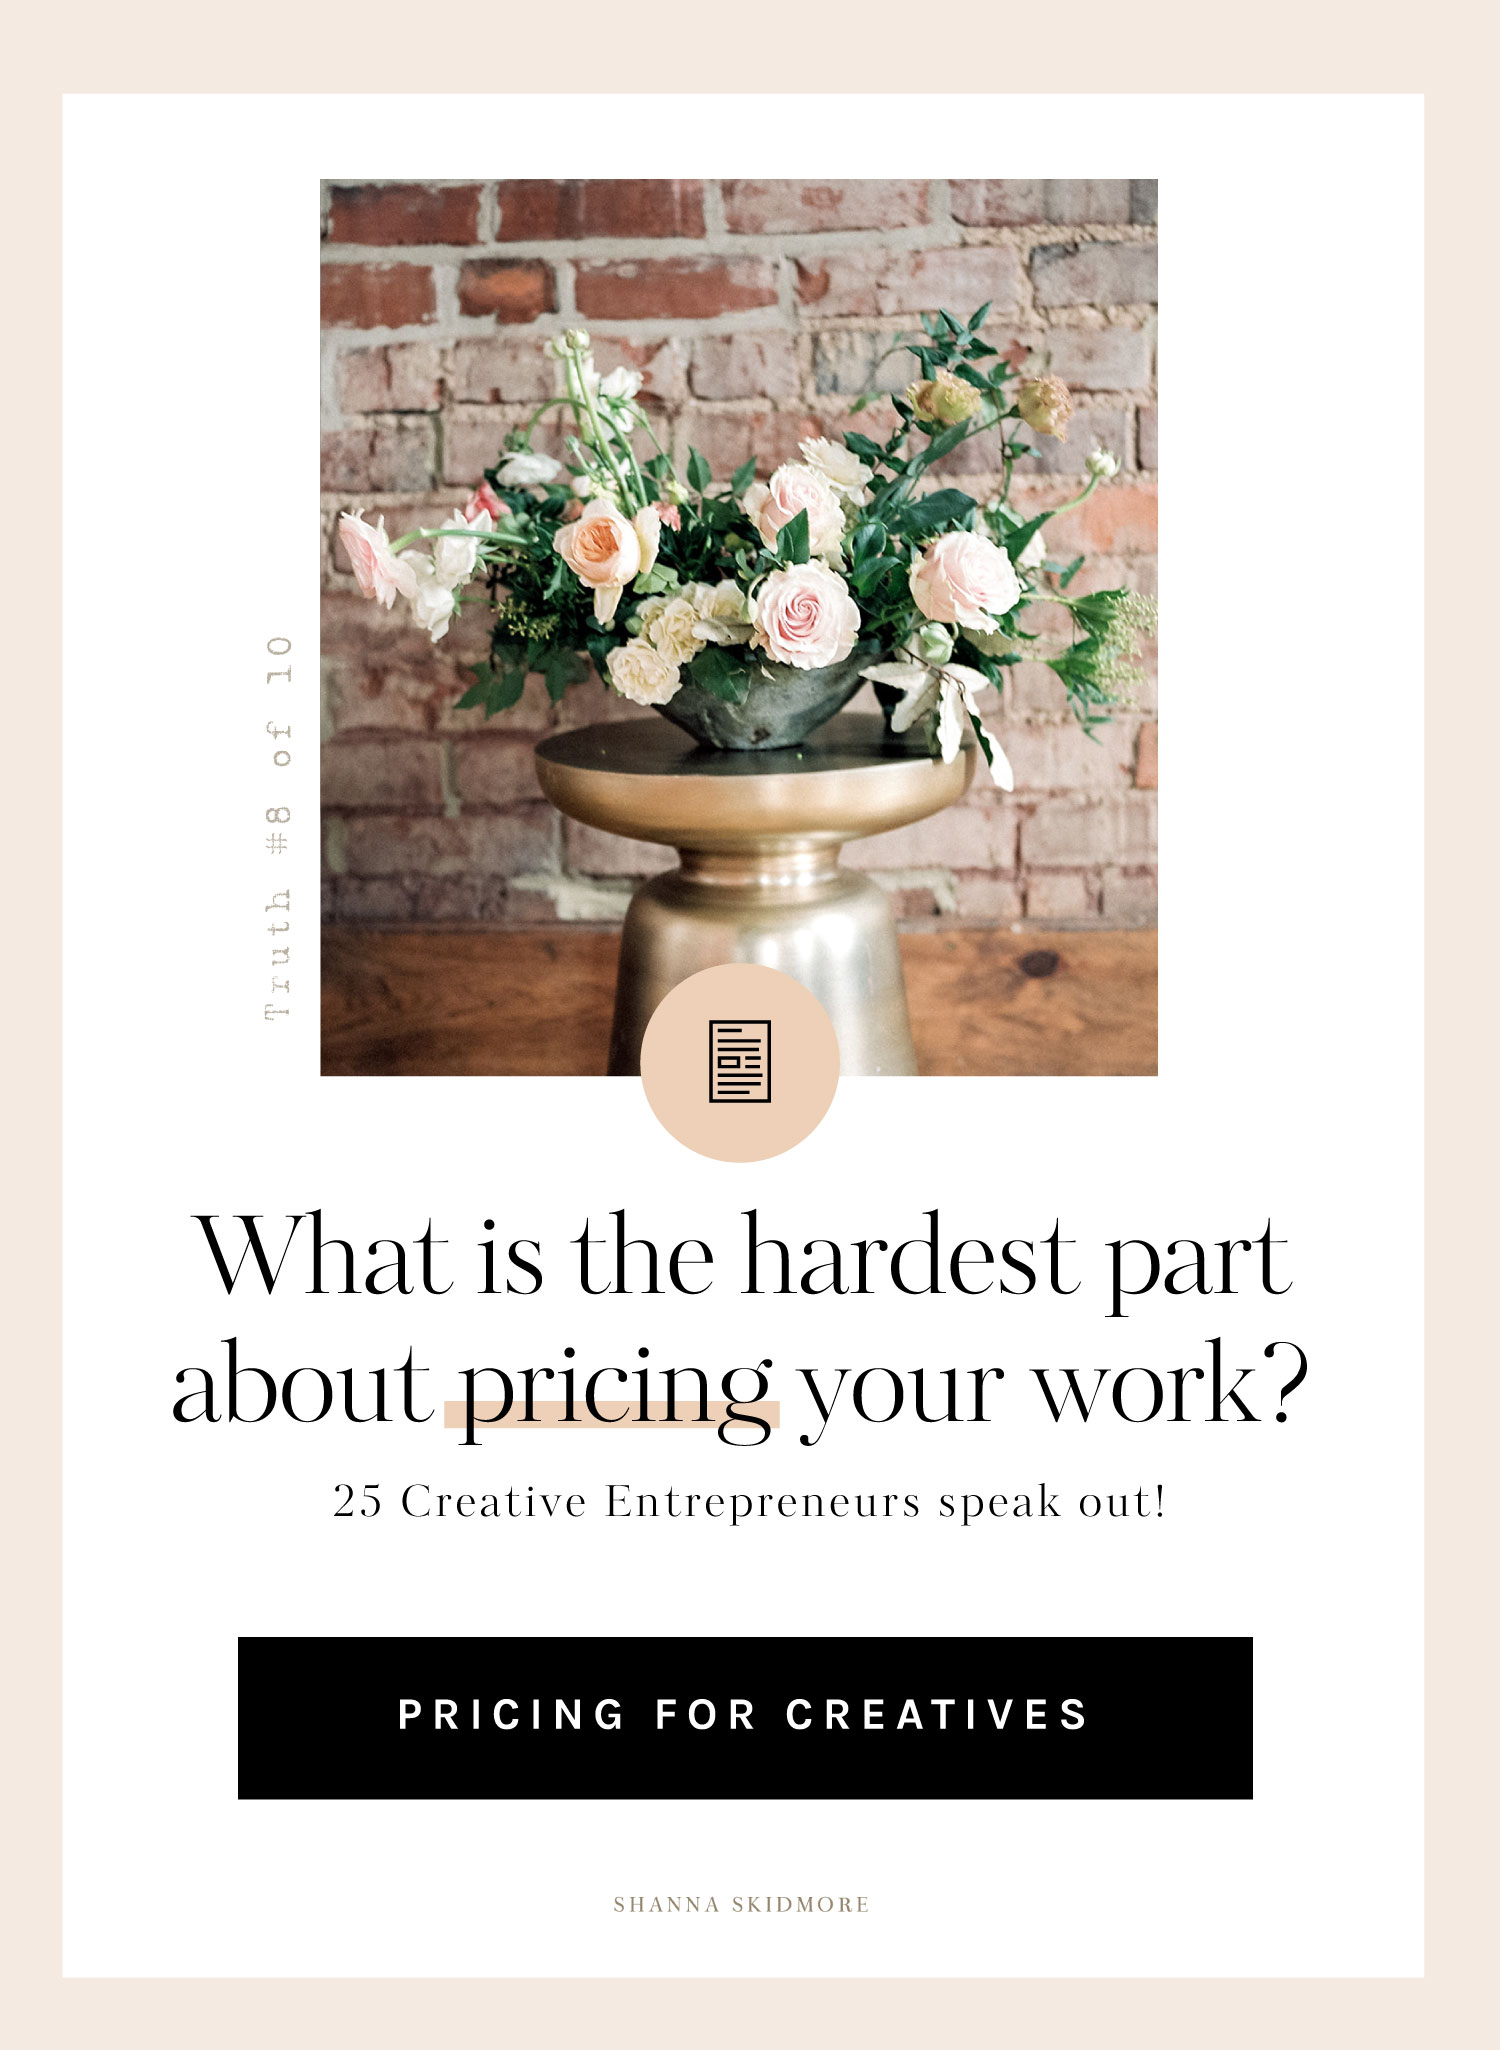 20 Creative Entrepreneurs speak out : "What is the hardest thing about pricing my work?"